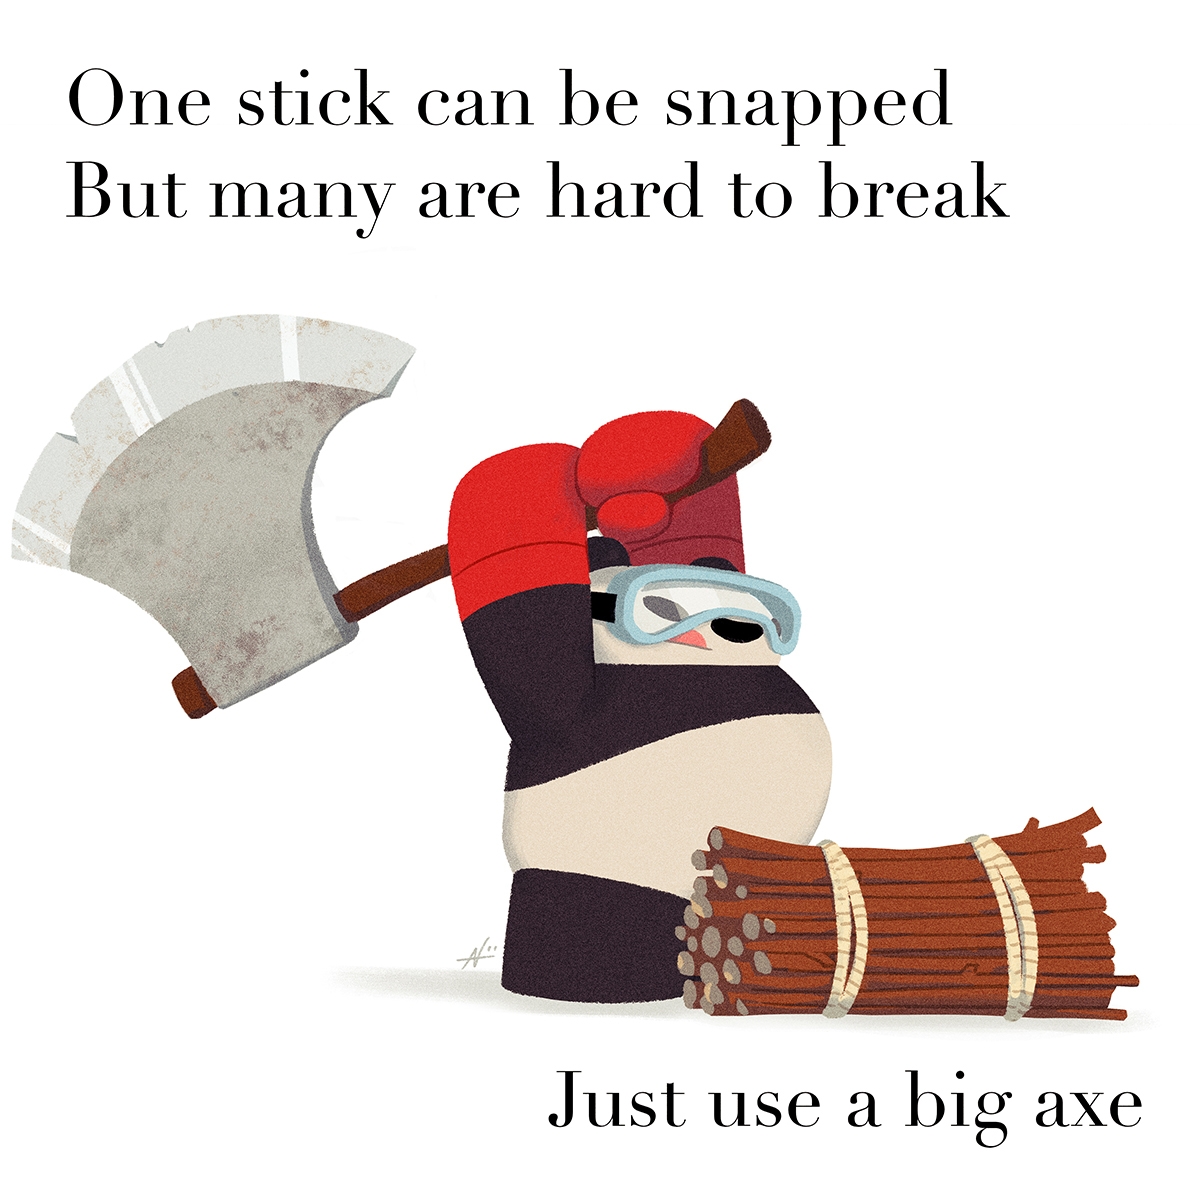 One stick can be snapped But many are hard to break Just use a big axe